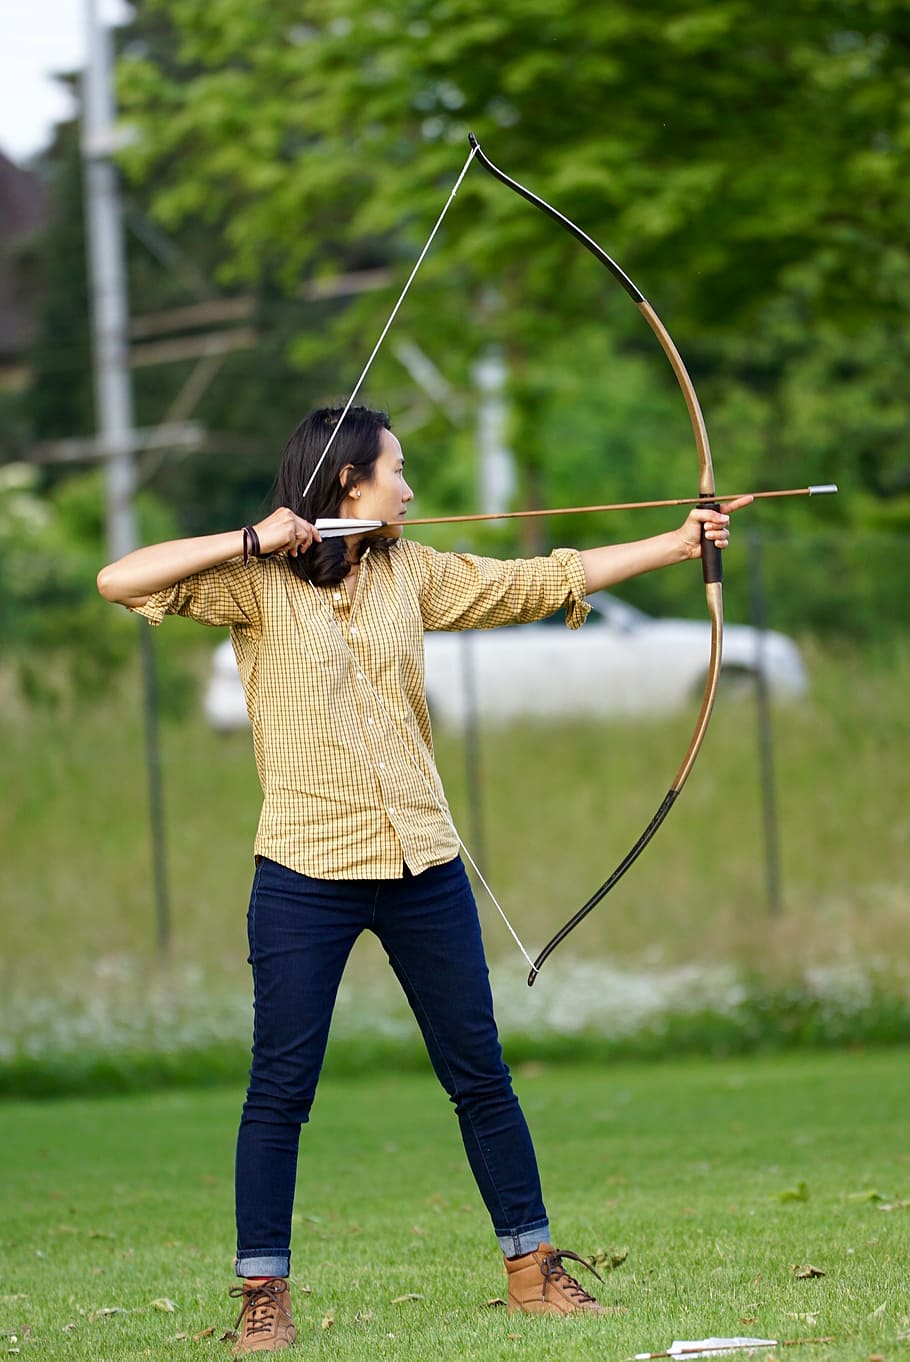 Hd Wallpaper Person Holding Bow With Arrow Bows And Arrows Archery